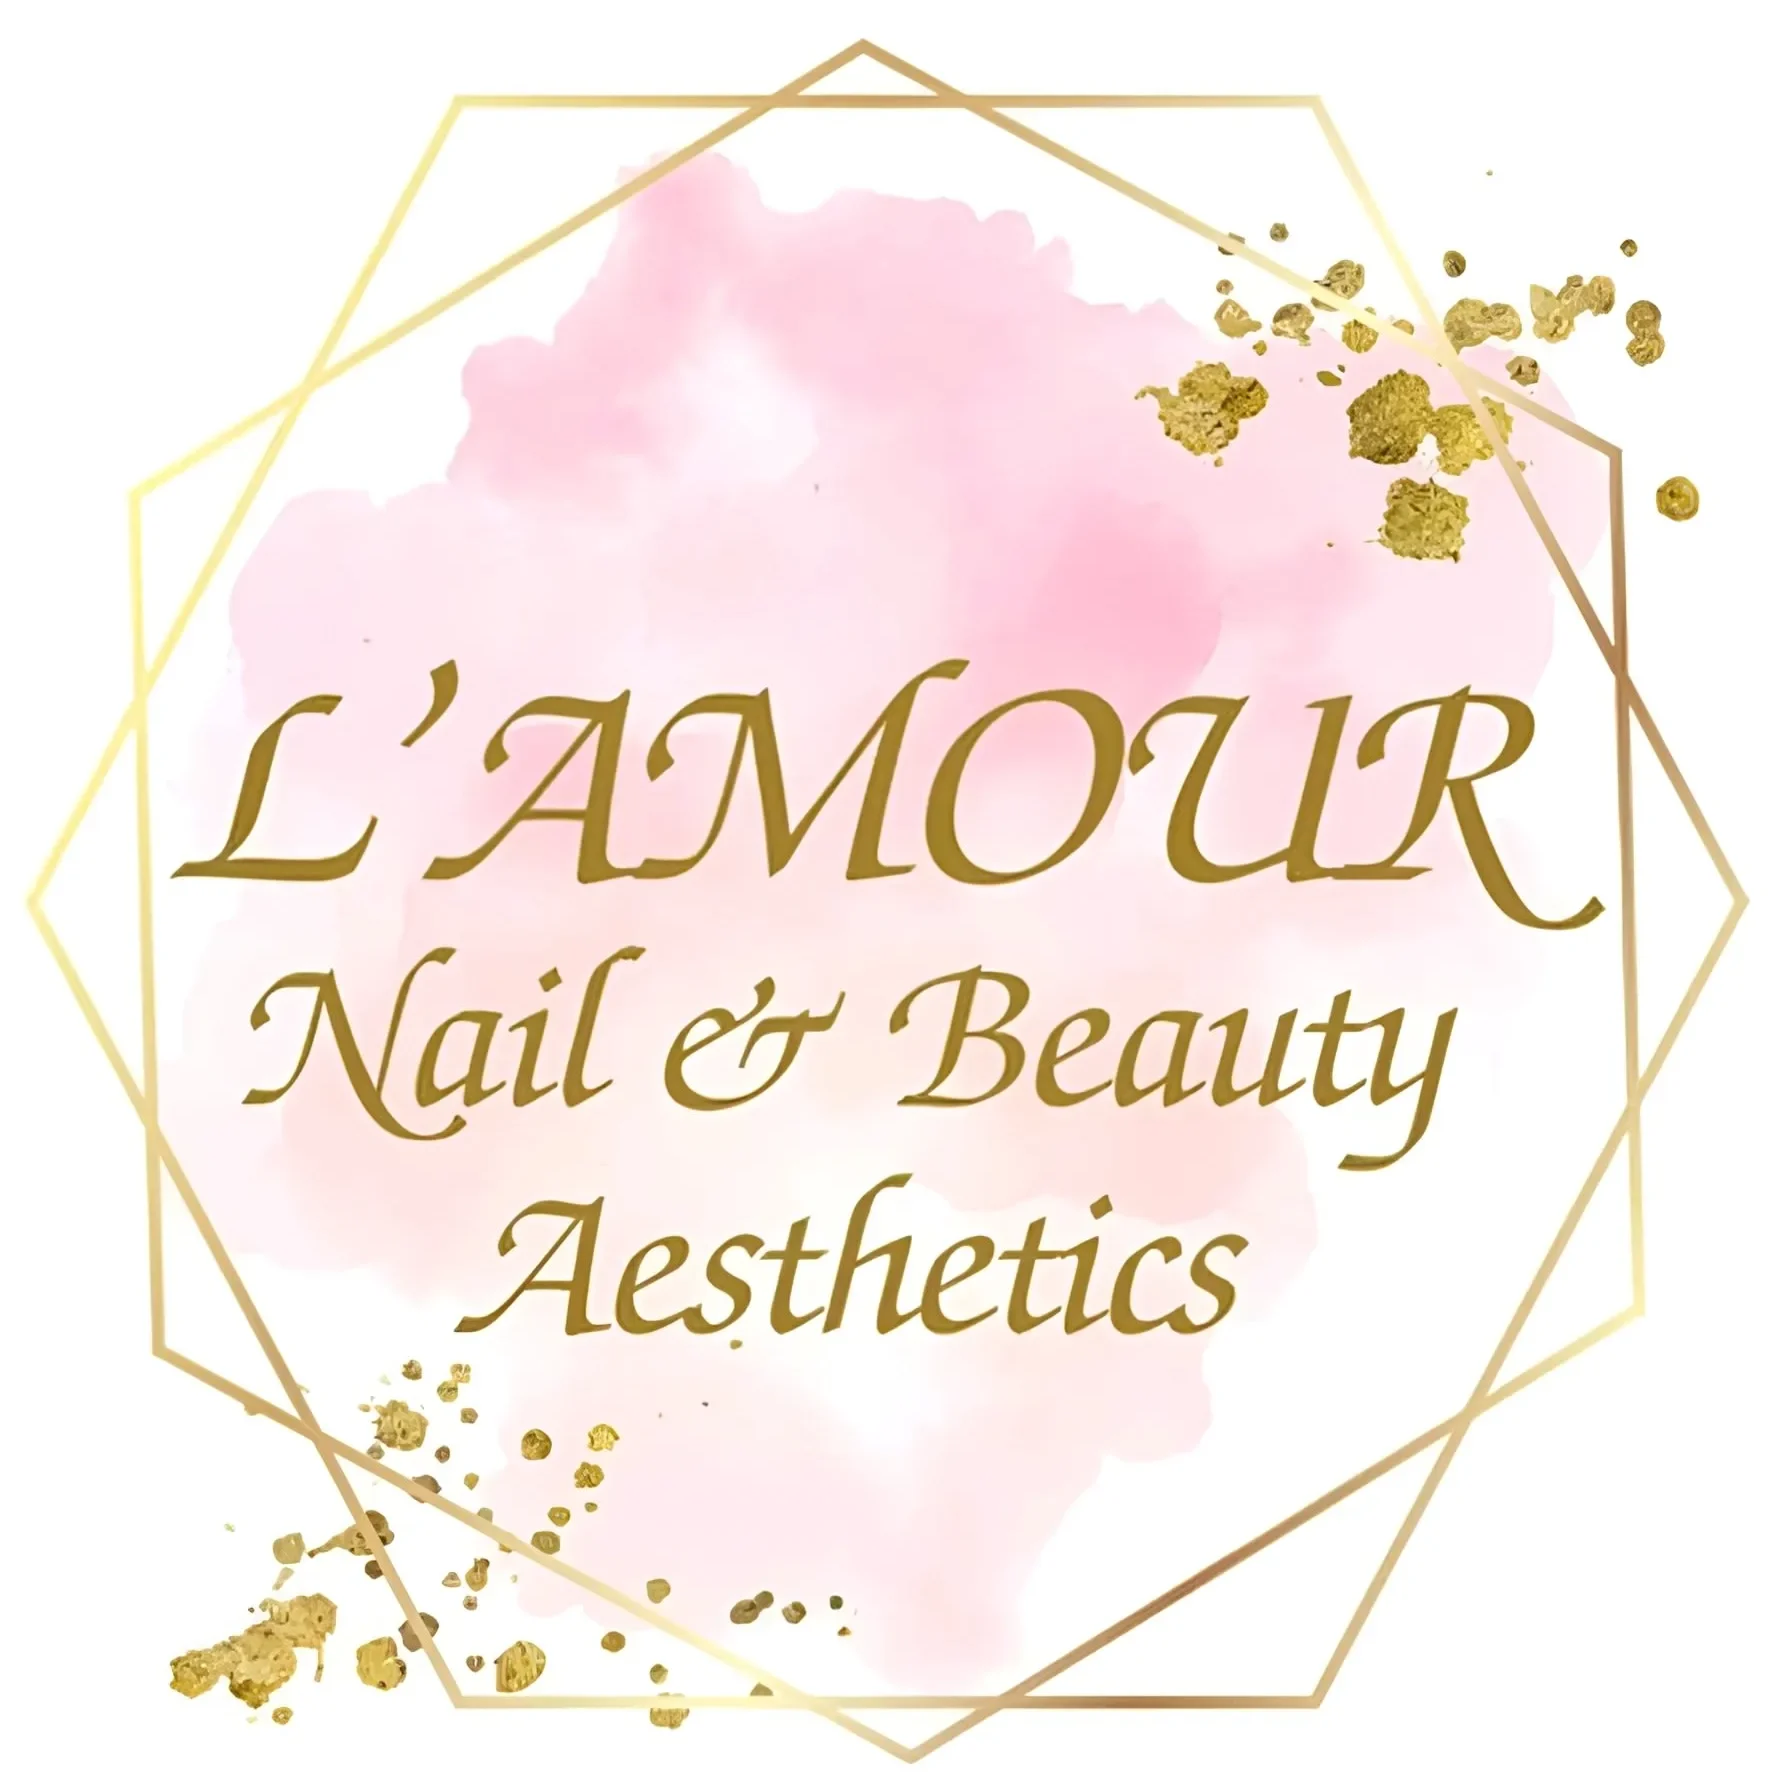 L'amour Nail and Beauty - Newcastle Upon Tyne, Tyne and Wear NE13 7BA - 07543 913402 | ShowMeLocal.com